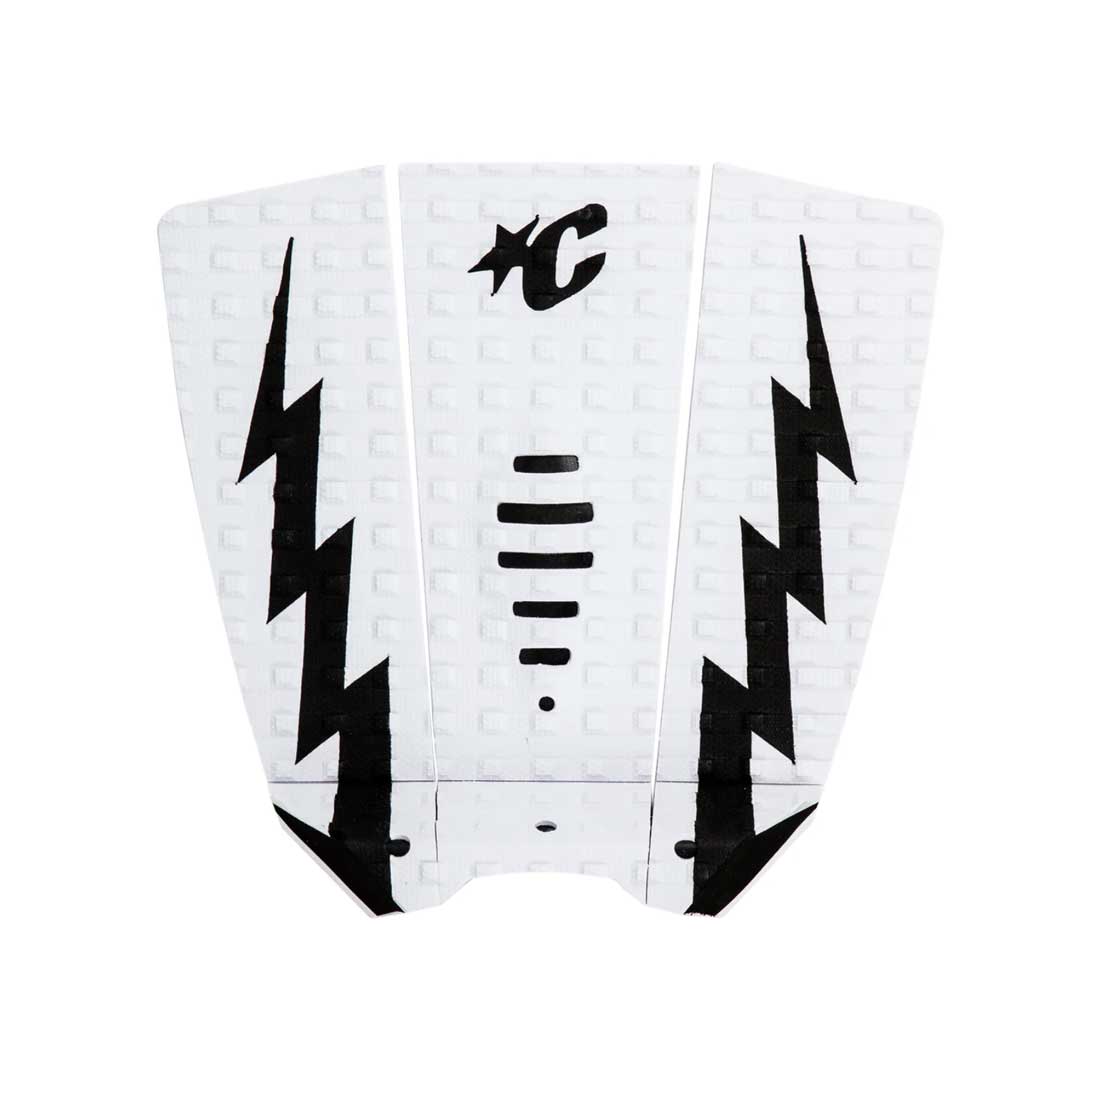 Surfboard Traction Pad Creatures Mick Eugene Fanning Lite – White Black